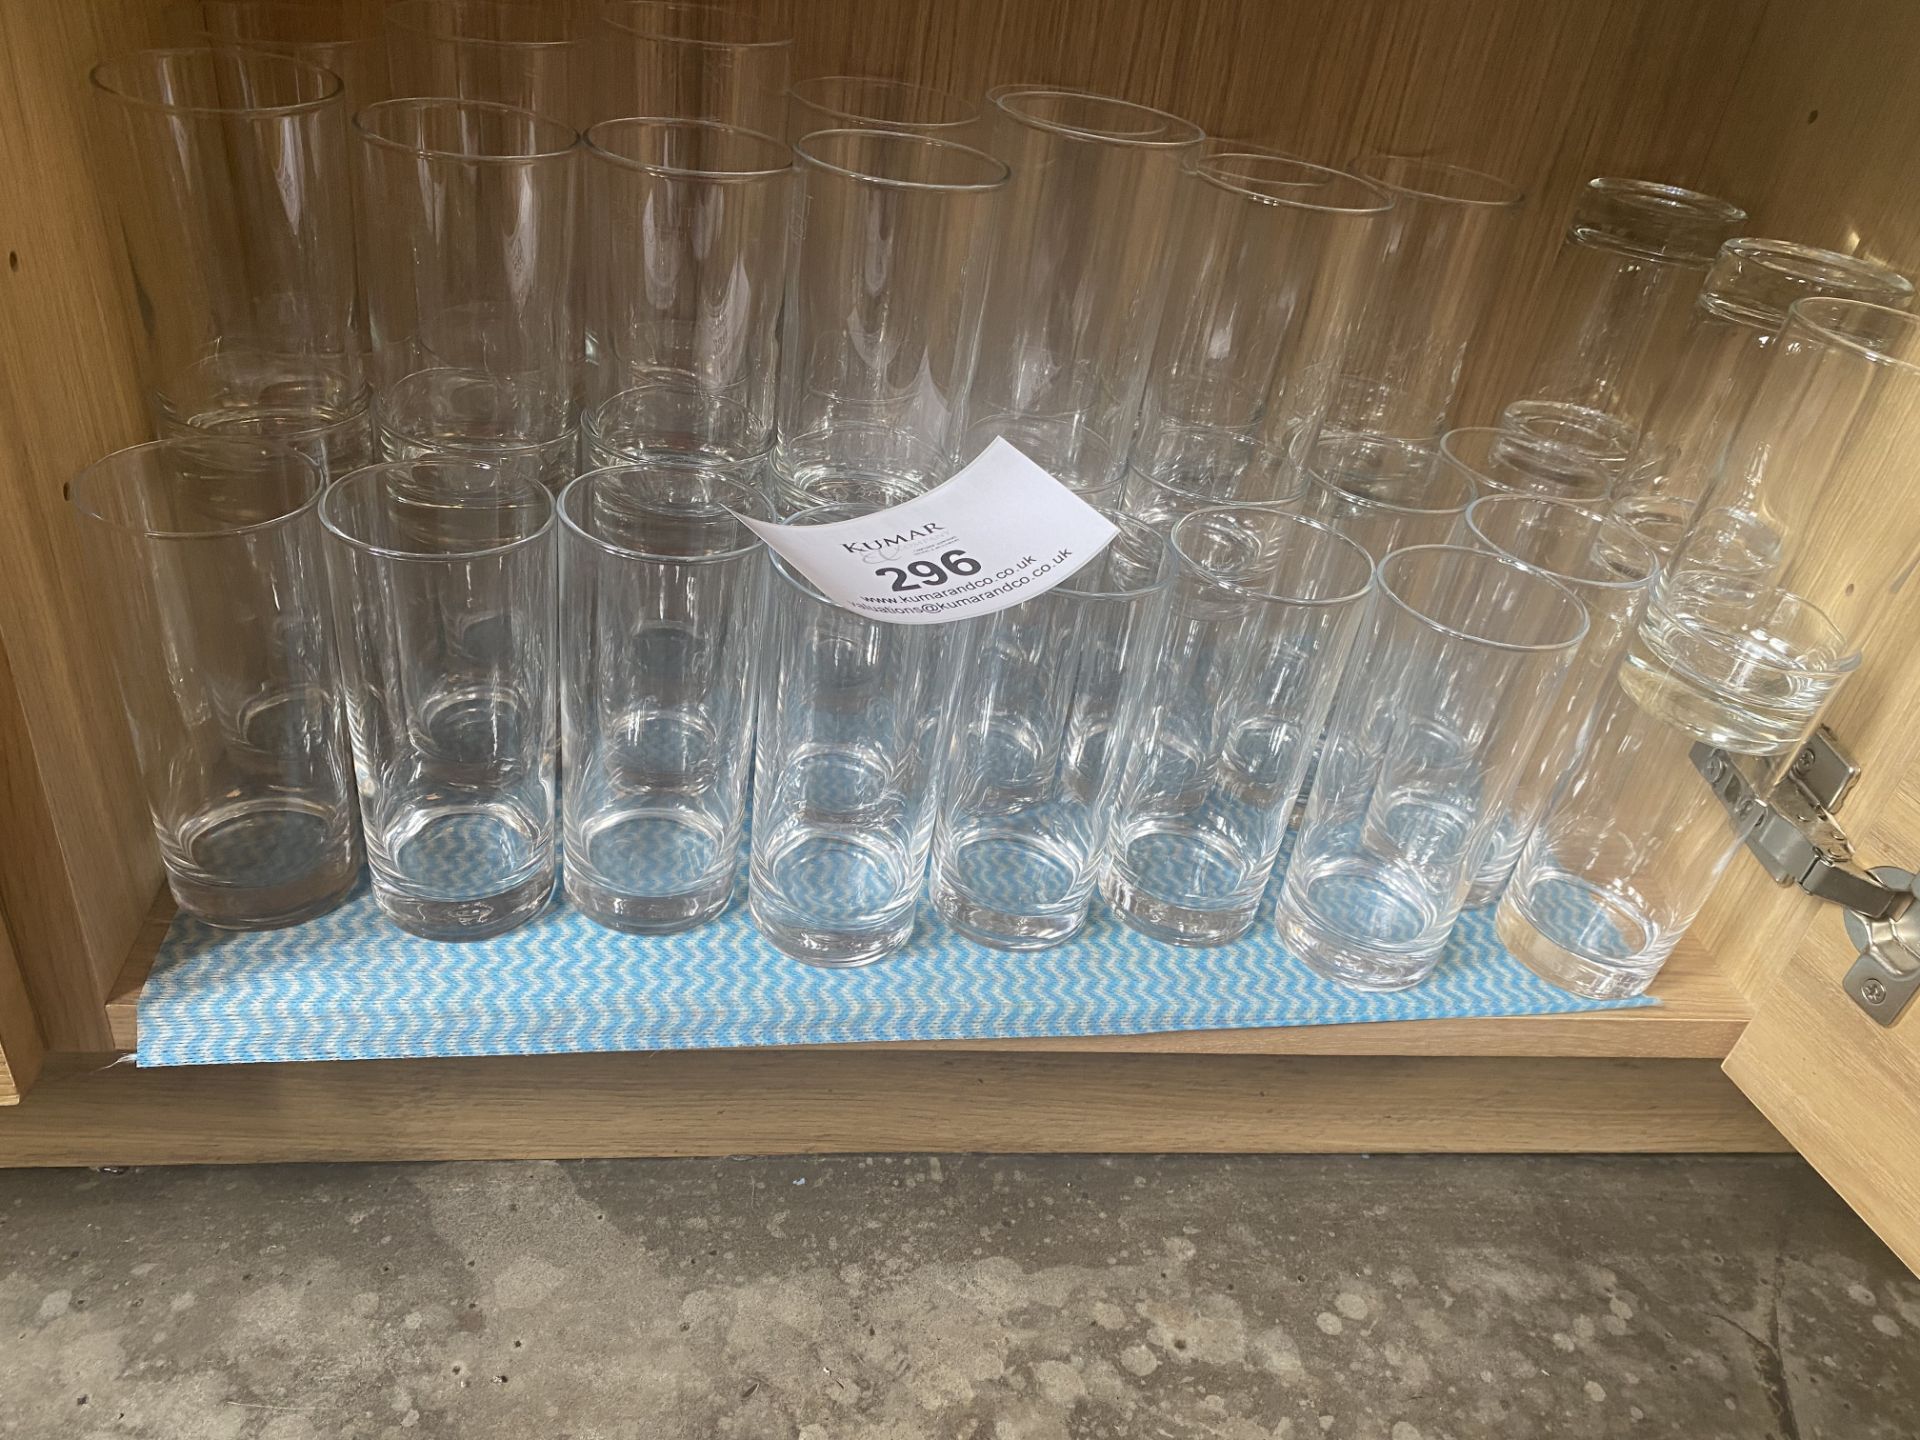 42x Tall Drinking Glasses. Please Note - This lot is located at Hengata Restaurant, 106 High Street, - Bild 2 aus 3